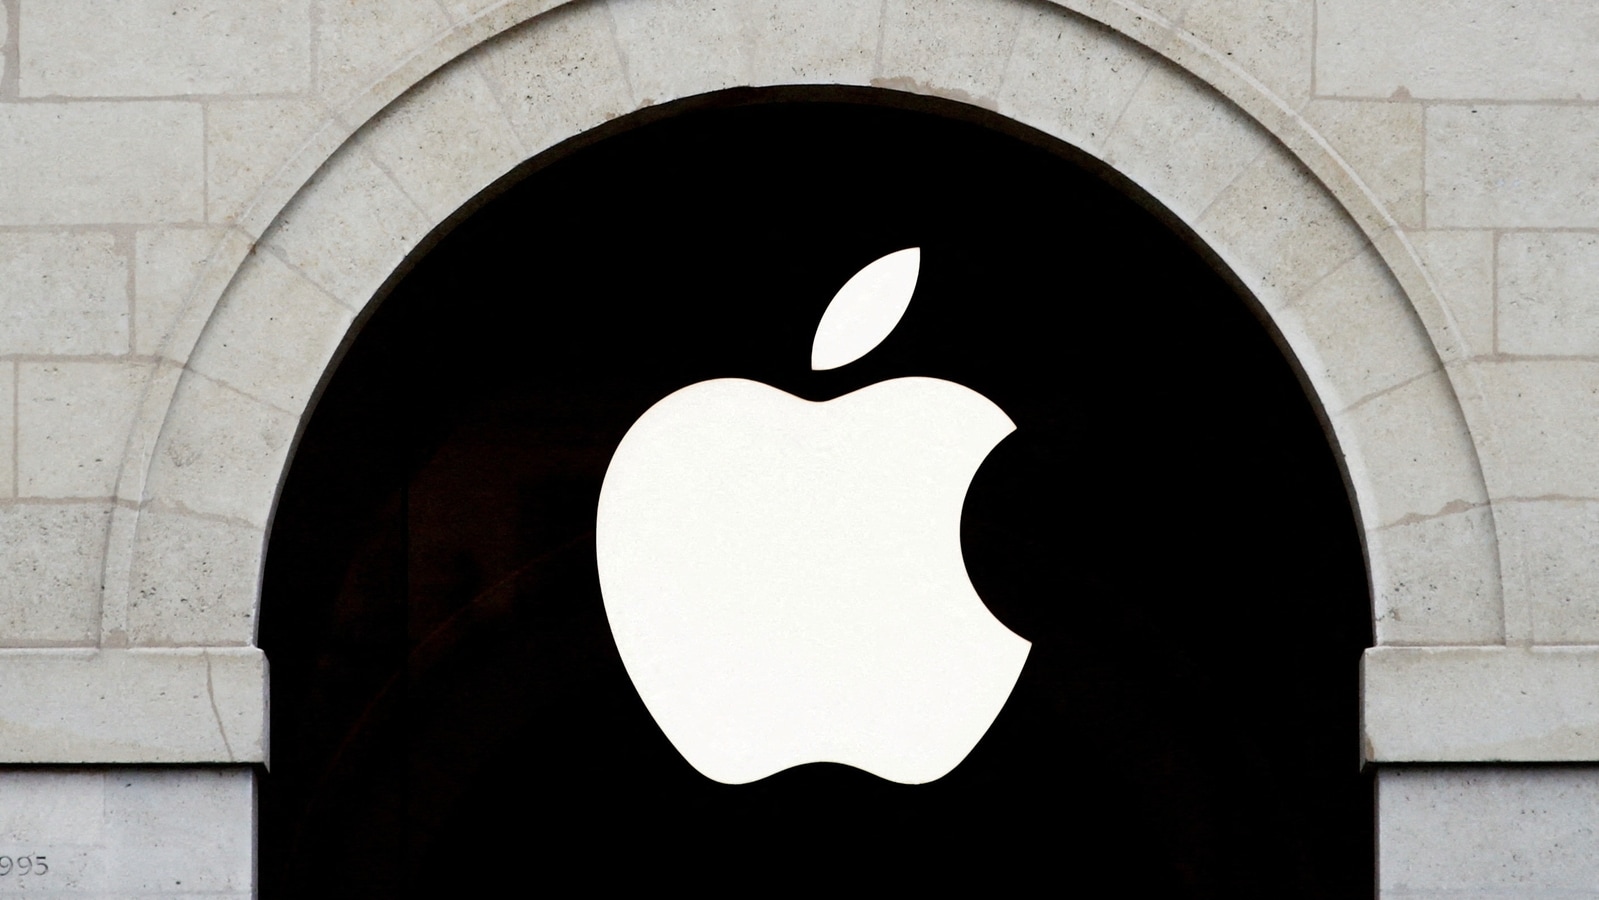 Tamil Nadu in $4.4 billion deals with Apple suppliers such as Tata Electronics, Pegatron